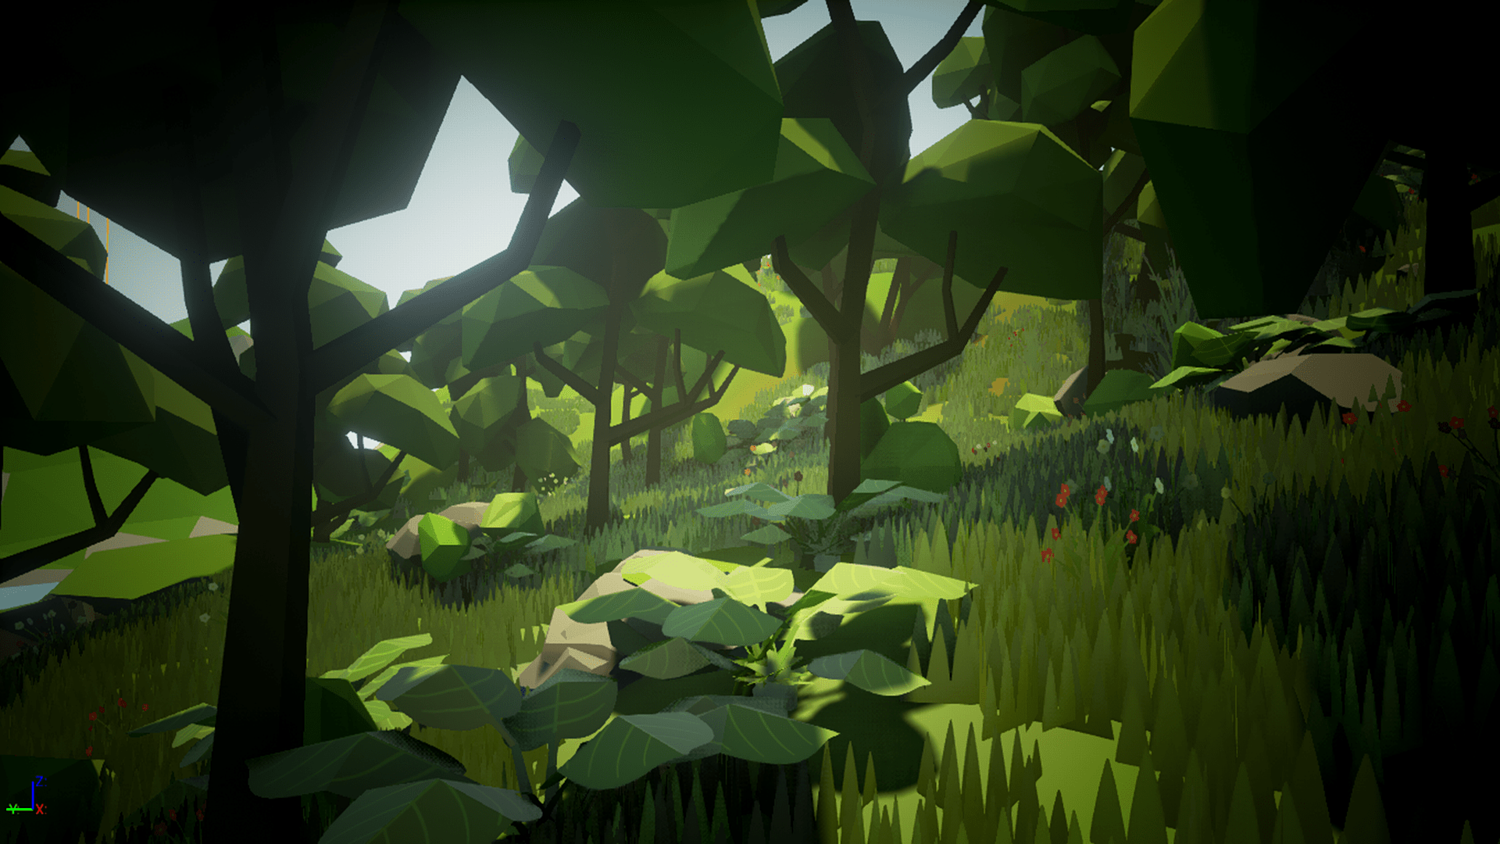 FREE - Asset - 4.27 - 4.26 - Olbert's Low Poly: Forest